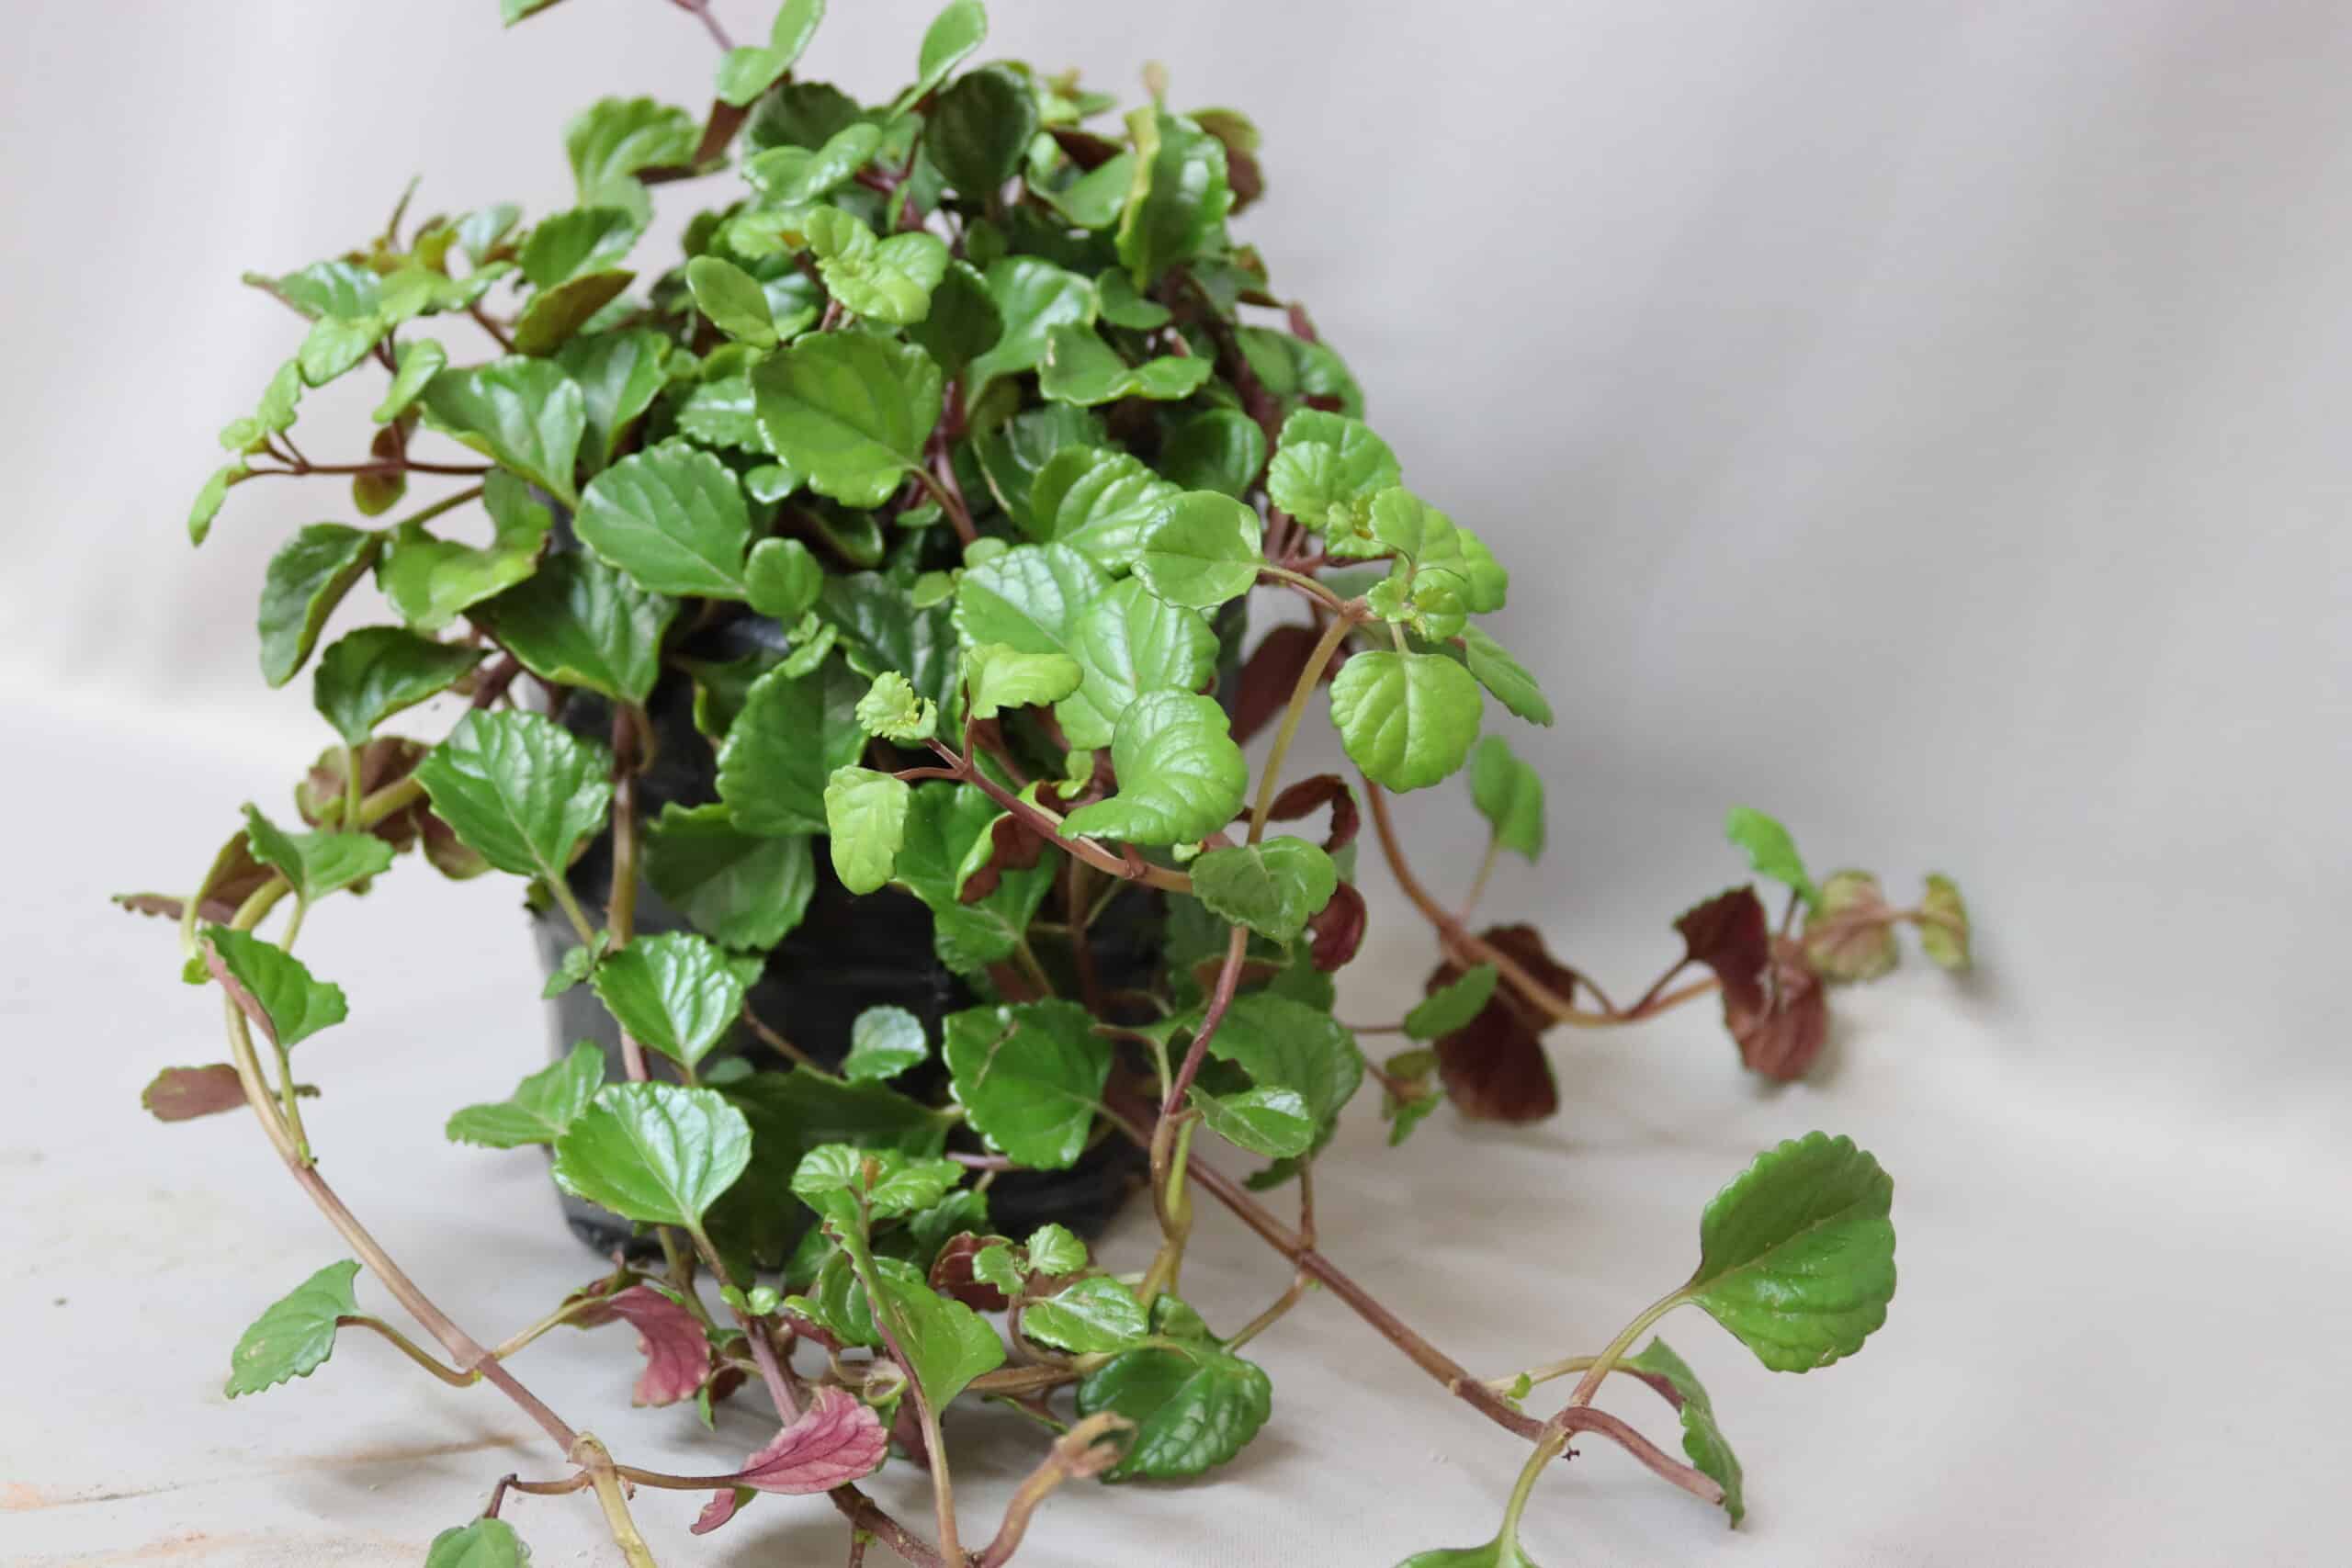 An overgrown Plectranthus plant in a black pot, with stems lying on the white surface beside the pot.